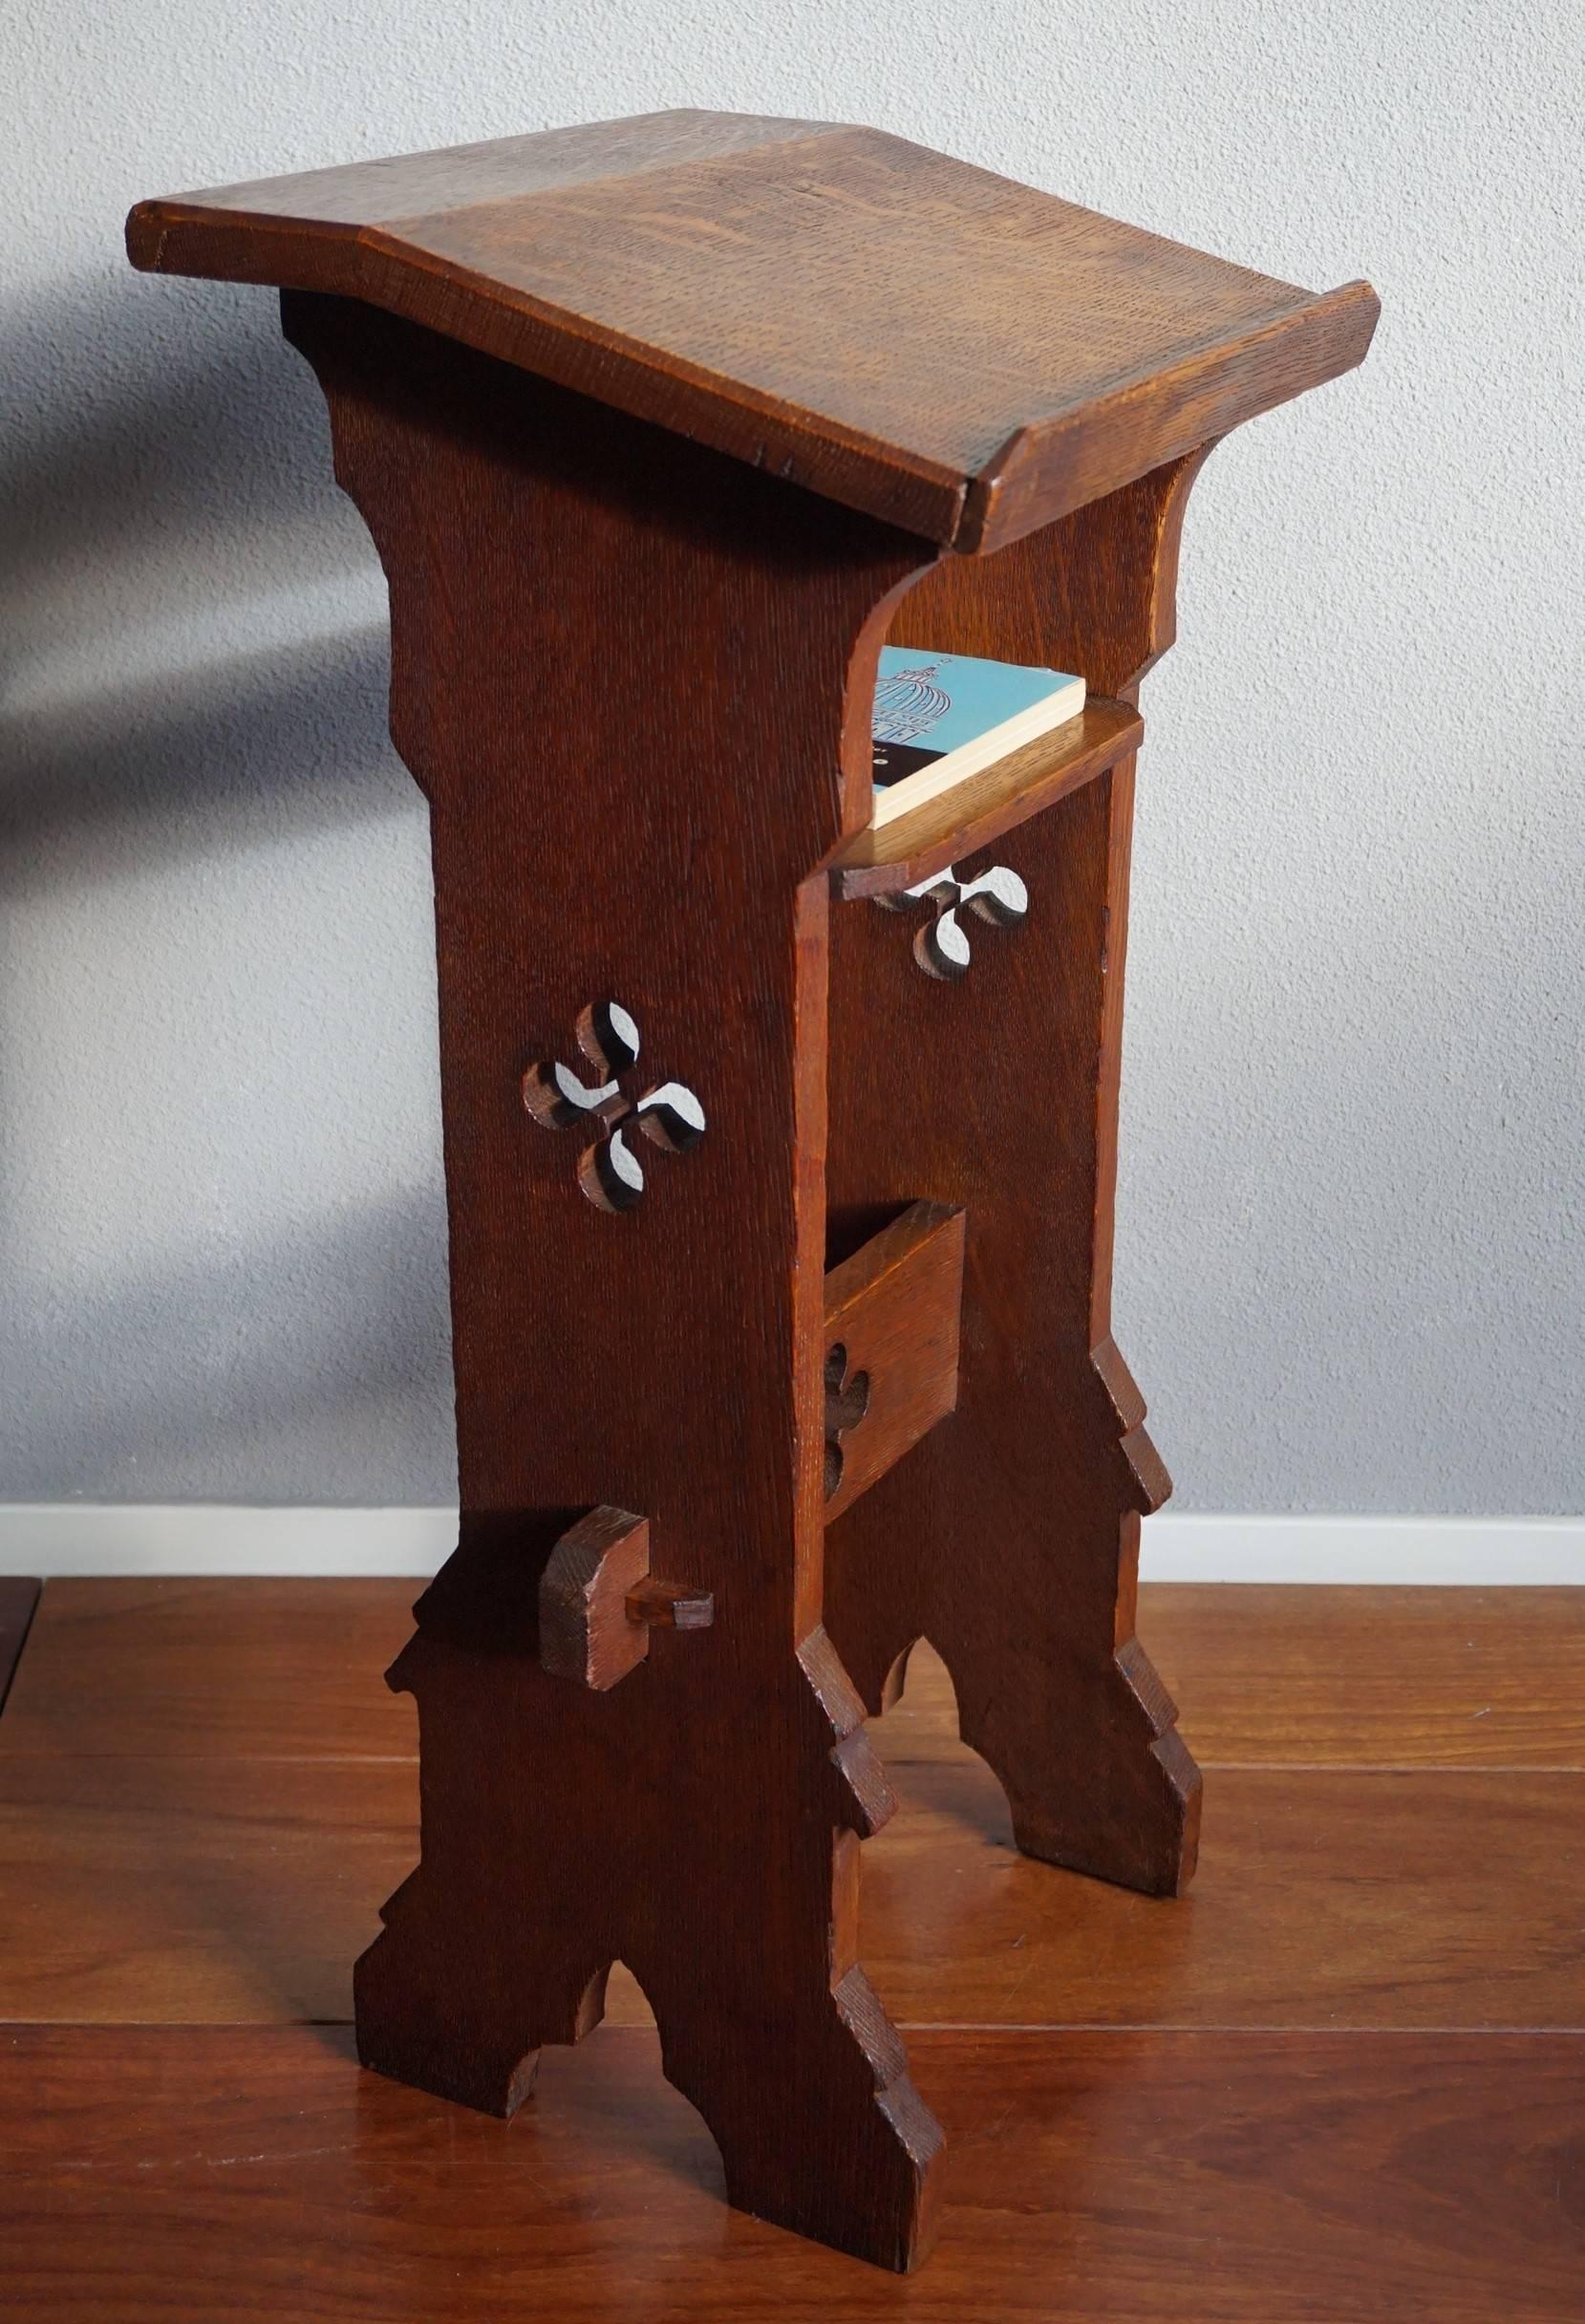 Antique and small size church bible stand.

We are not sure if this handcrafted bible Stand was made for a child or for someone who is kneeling or in a chair, but it is a wonderful piece of antique church furniture and an absolute joy to own and